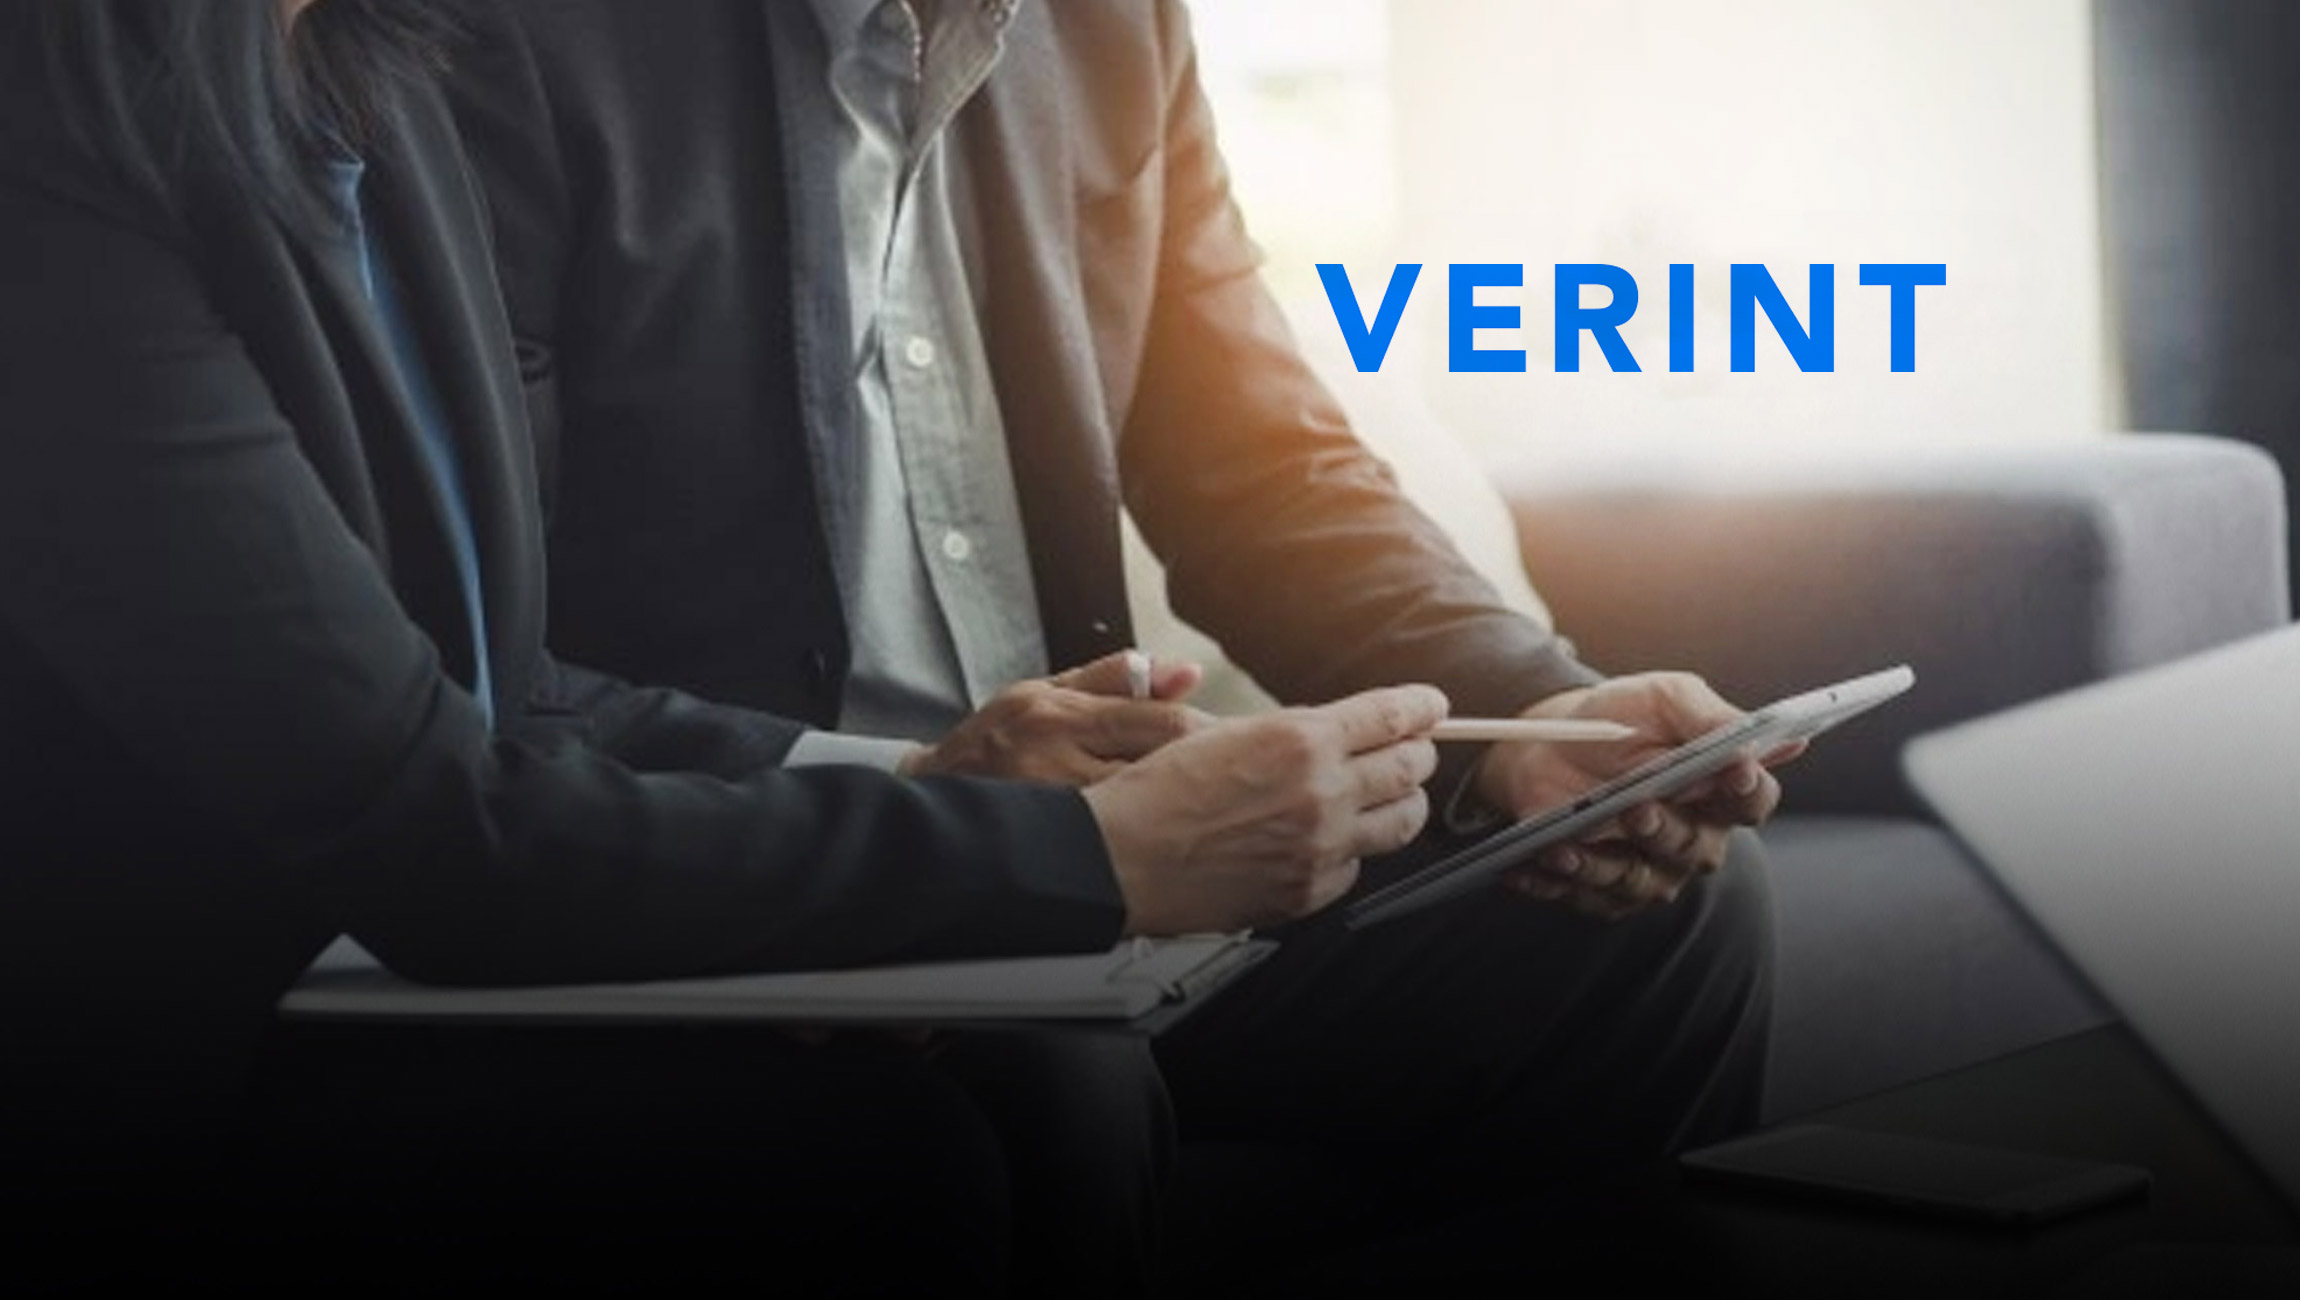 Verint Announces All-Star Keynote Lineup Of Barbara Corcoran, Charlene Li And Jay Shetty For Industry Leading Customer Engagement Event